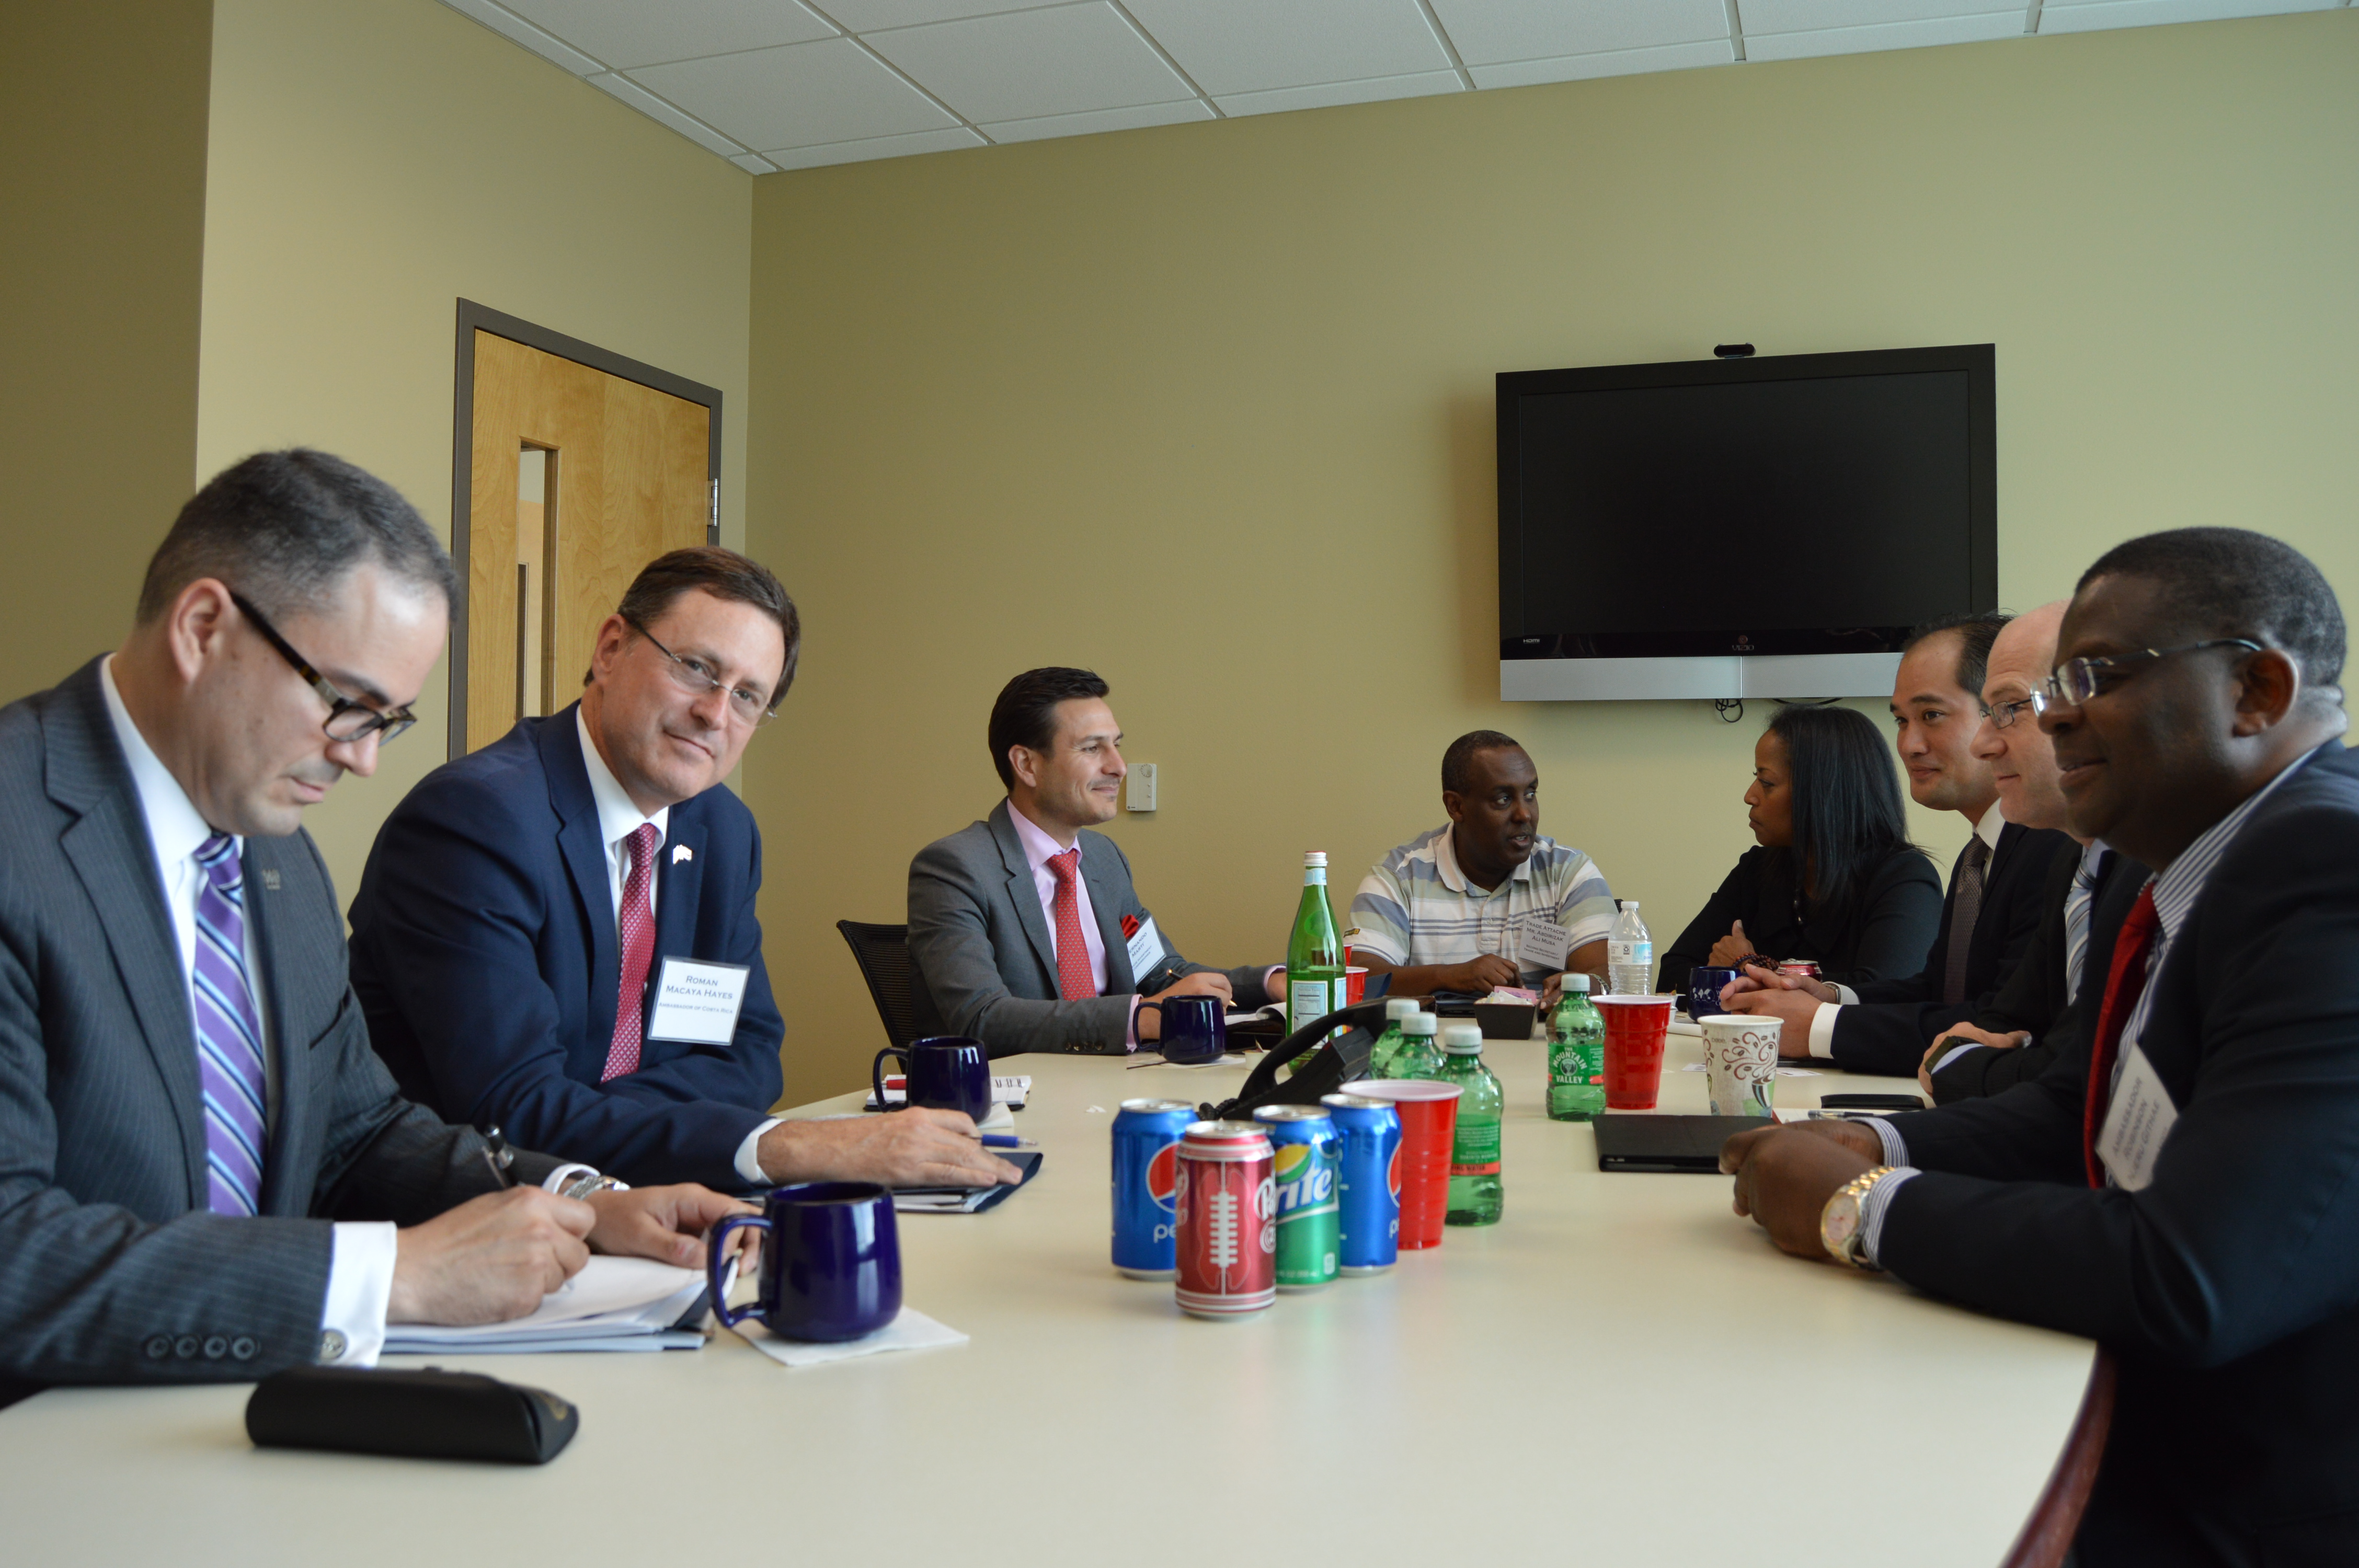 The World Trade Center Arkansas hosts a meeting between the Center, visiting diplomats and the Arkansas Economic Development Commission. From Left to Right: Melvin Torres, Ambassador Roman Macaya (Costa Rica), Trade and Investment Commissioner Fernando Marti (ProMexico), Trade Attache Abdulrizak Musa (Embassy of Kenya in U.S.) Denise Thomas, Ben Walters (AEDC), Mark Hamer (AEDC), and Ambassador Robinson Githae (Kenya).